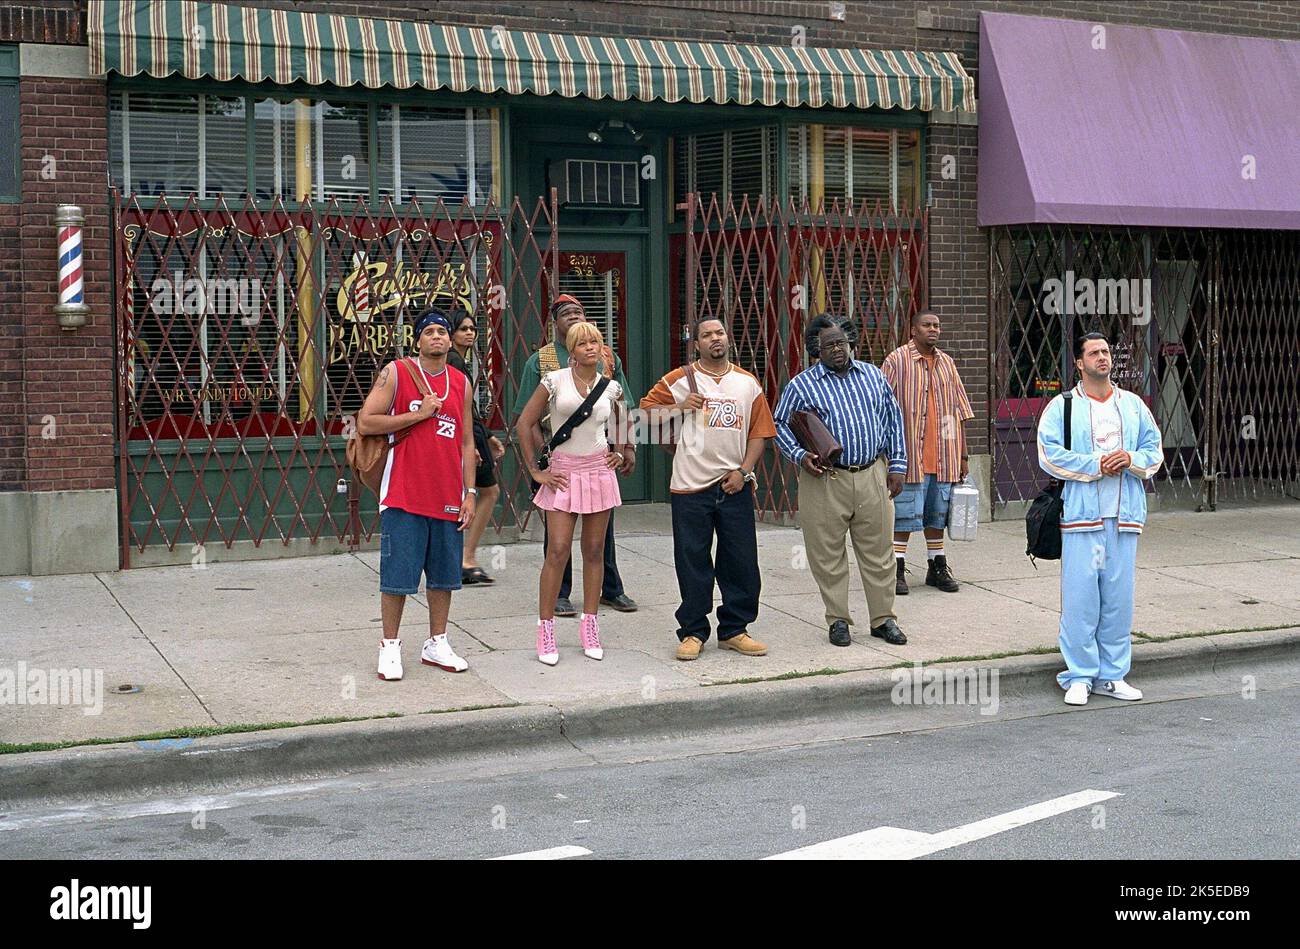 MICHAEL EALY, LEAONARD EARL HOWZE, EVE, ICE CUBE, CEDRIC THE ENTERTAINER, KENAN THOMPSON, TROY GARITY, BARBERSHOP 2: BACK IN BUSINESS, 2004 Stock Photo